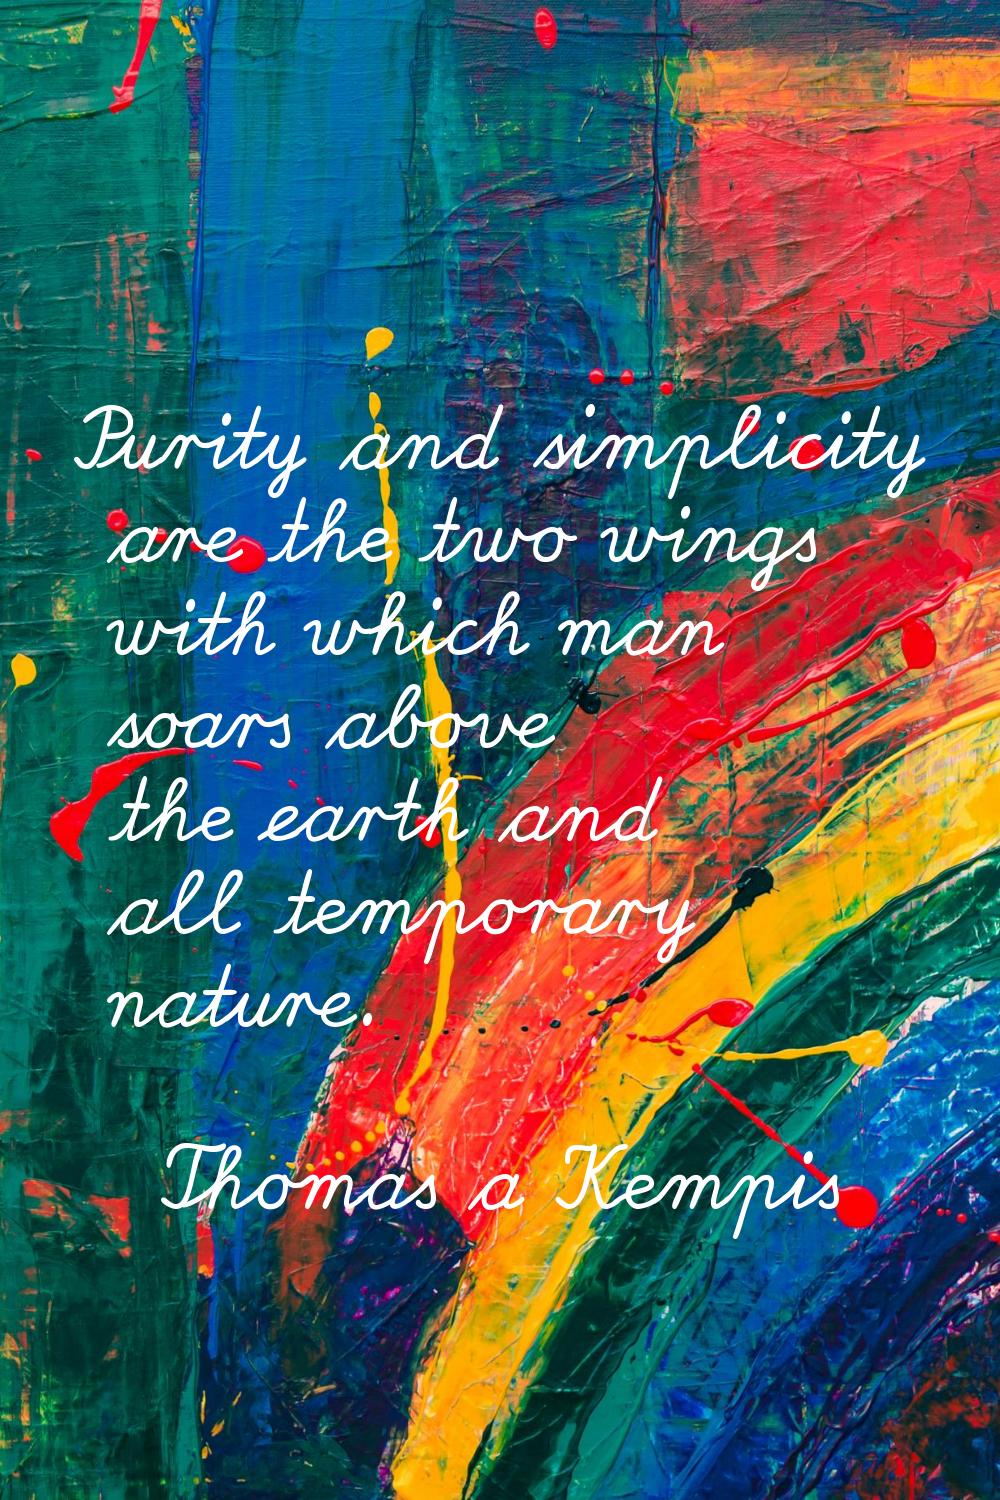 Purity and simplicity are the two wings with which man soars above the earth and all temporary natu